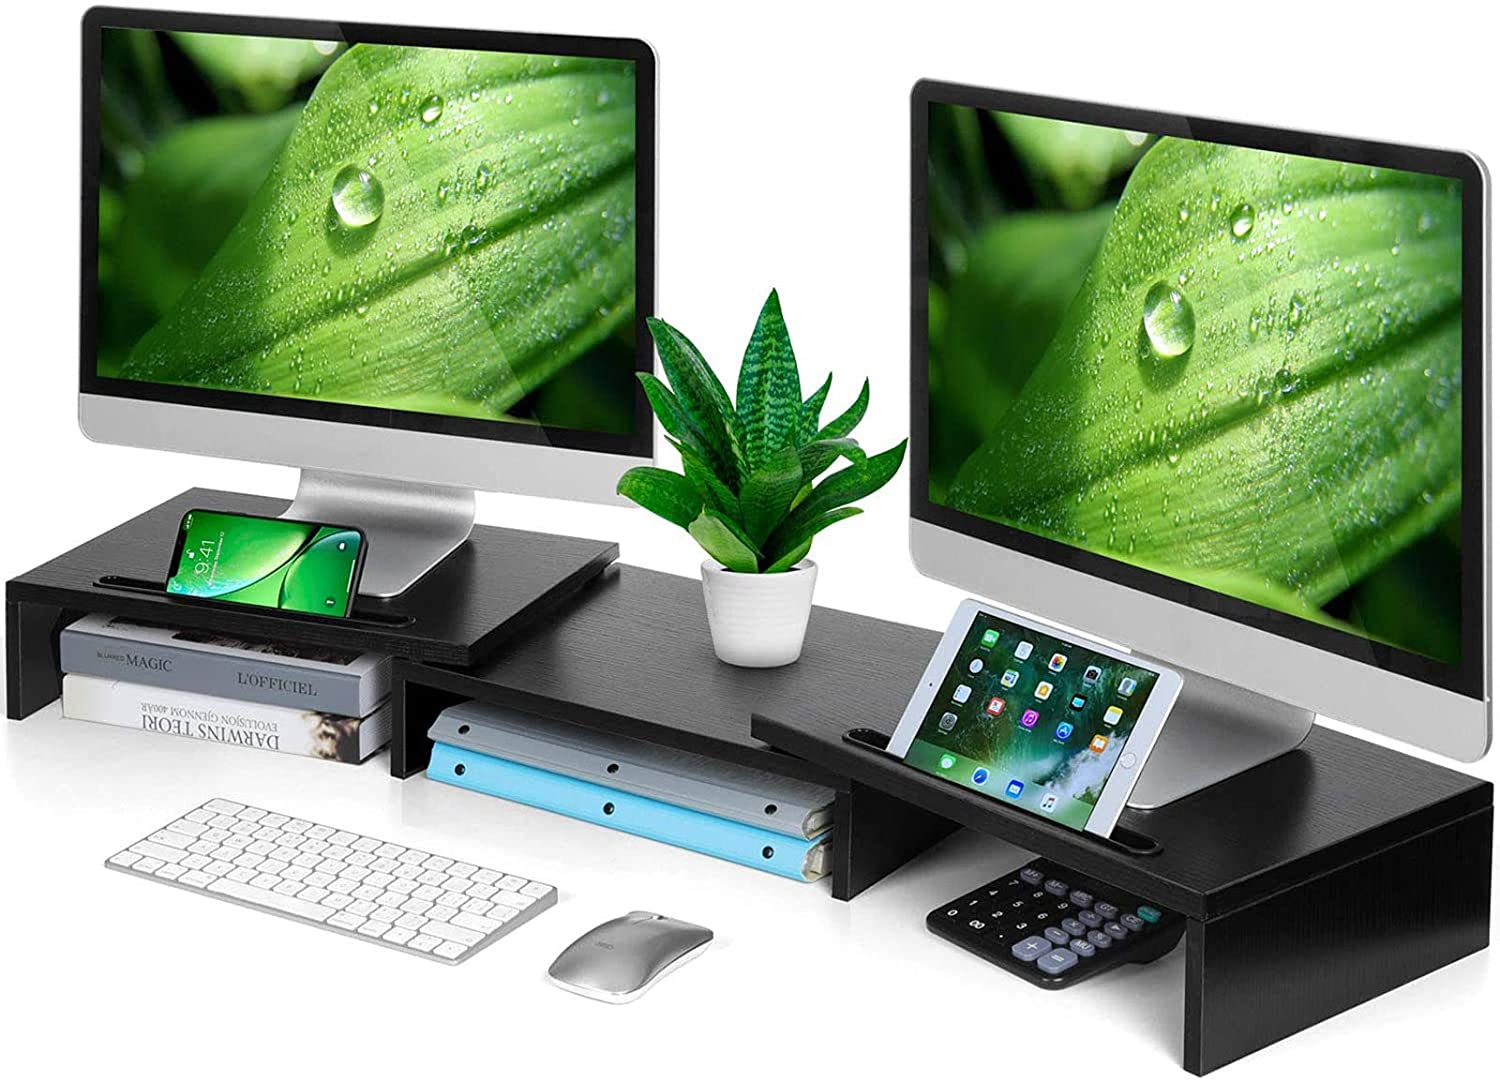 31 Home Office Gadgets You NEED To Have When Working Online